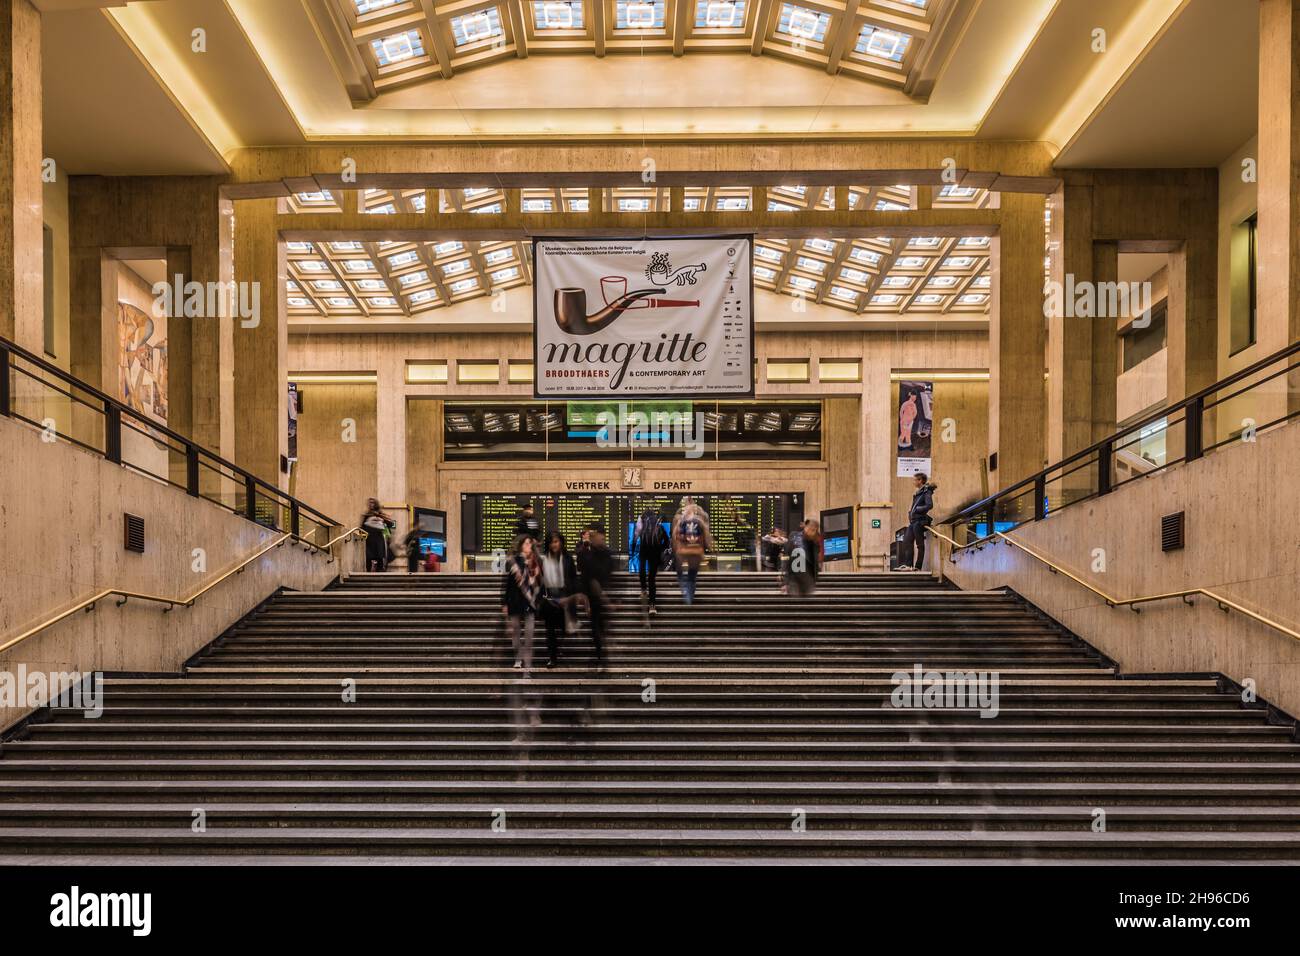 Brussels, Belgium - 01 28 2018: commuters walking in the main hall of the central railwaystation Stock Photo